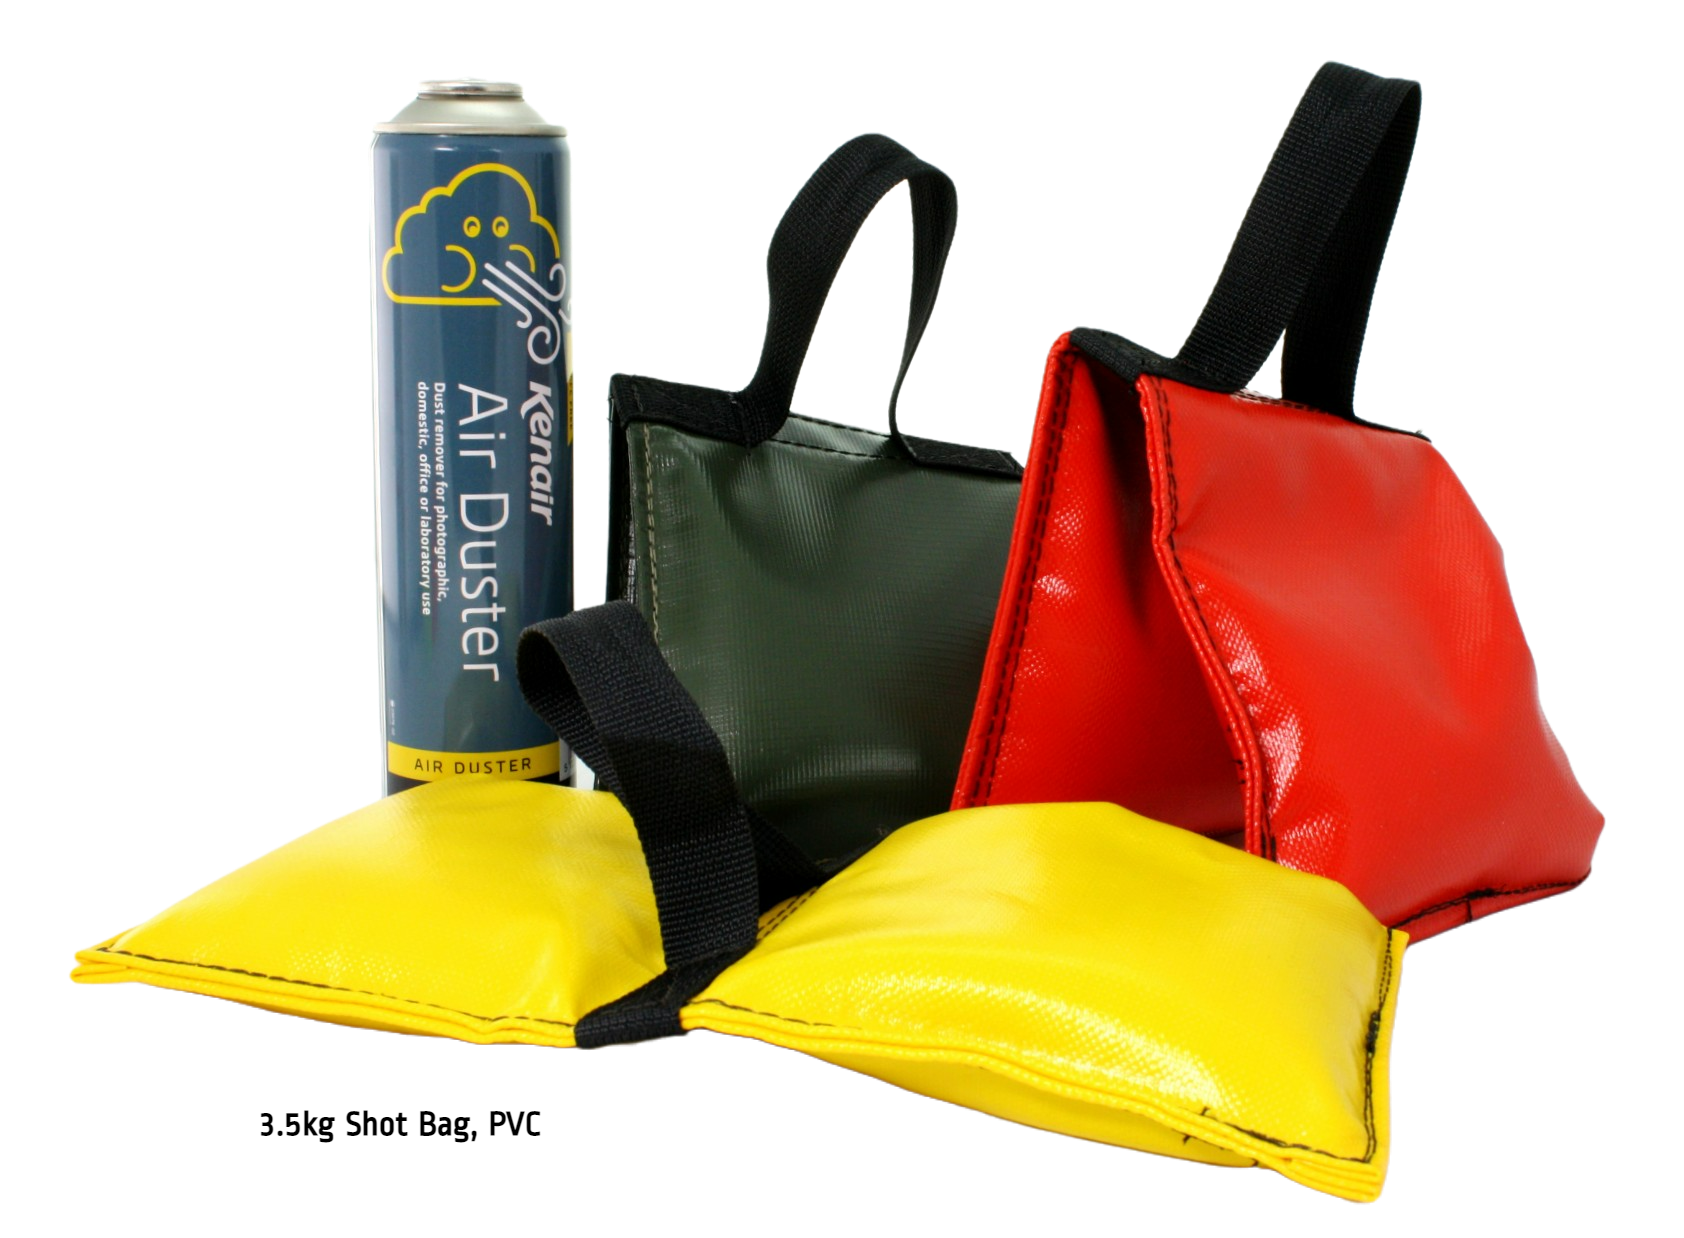 3.5kg Shot Bags, all PVC colours (red, green, yellow), with a Kenair can for scale